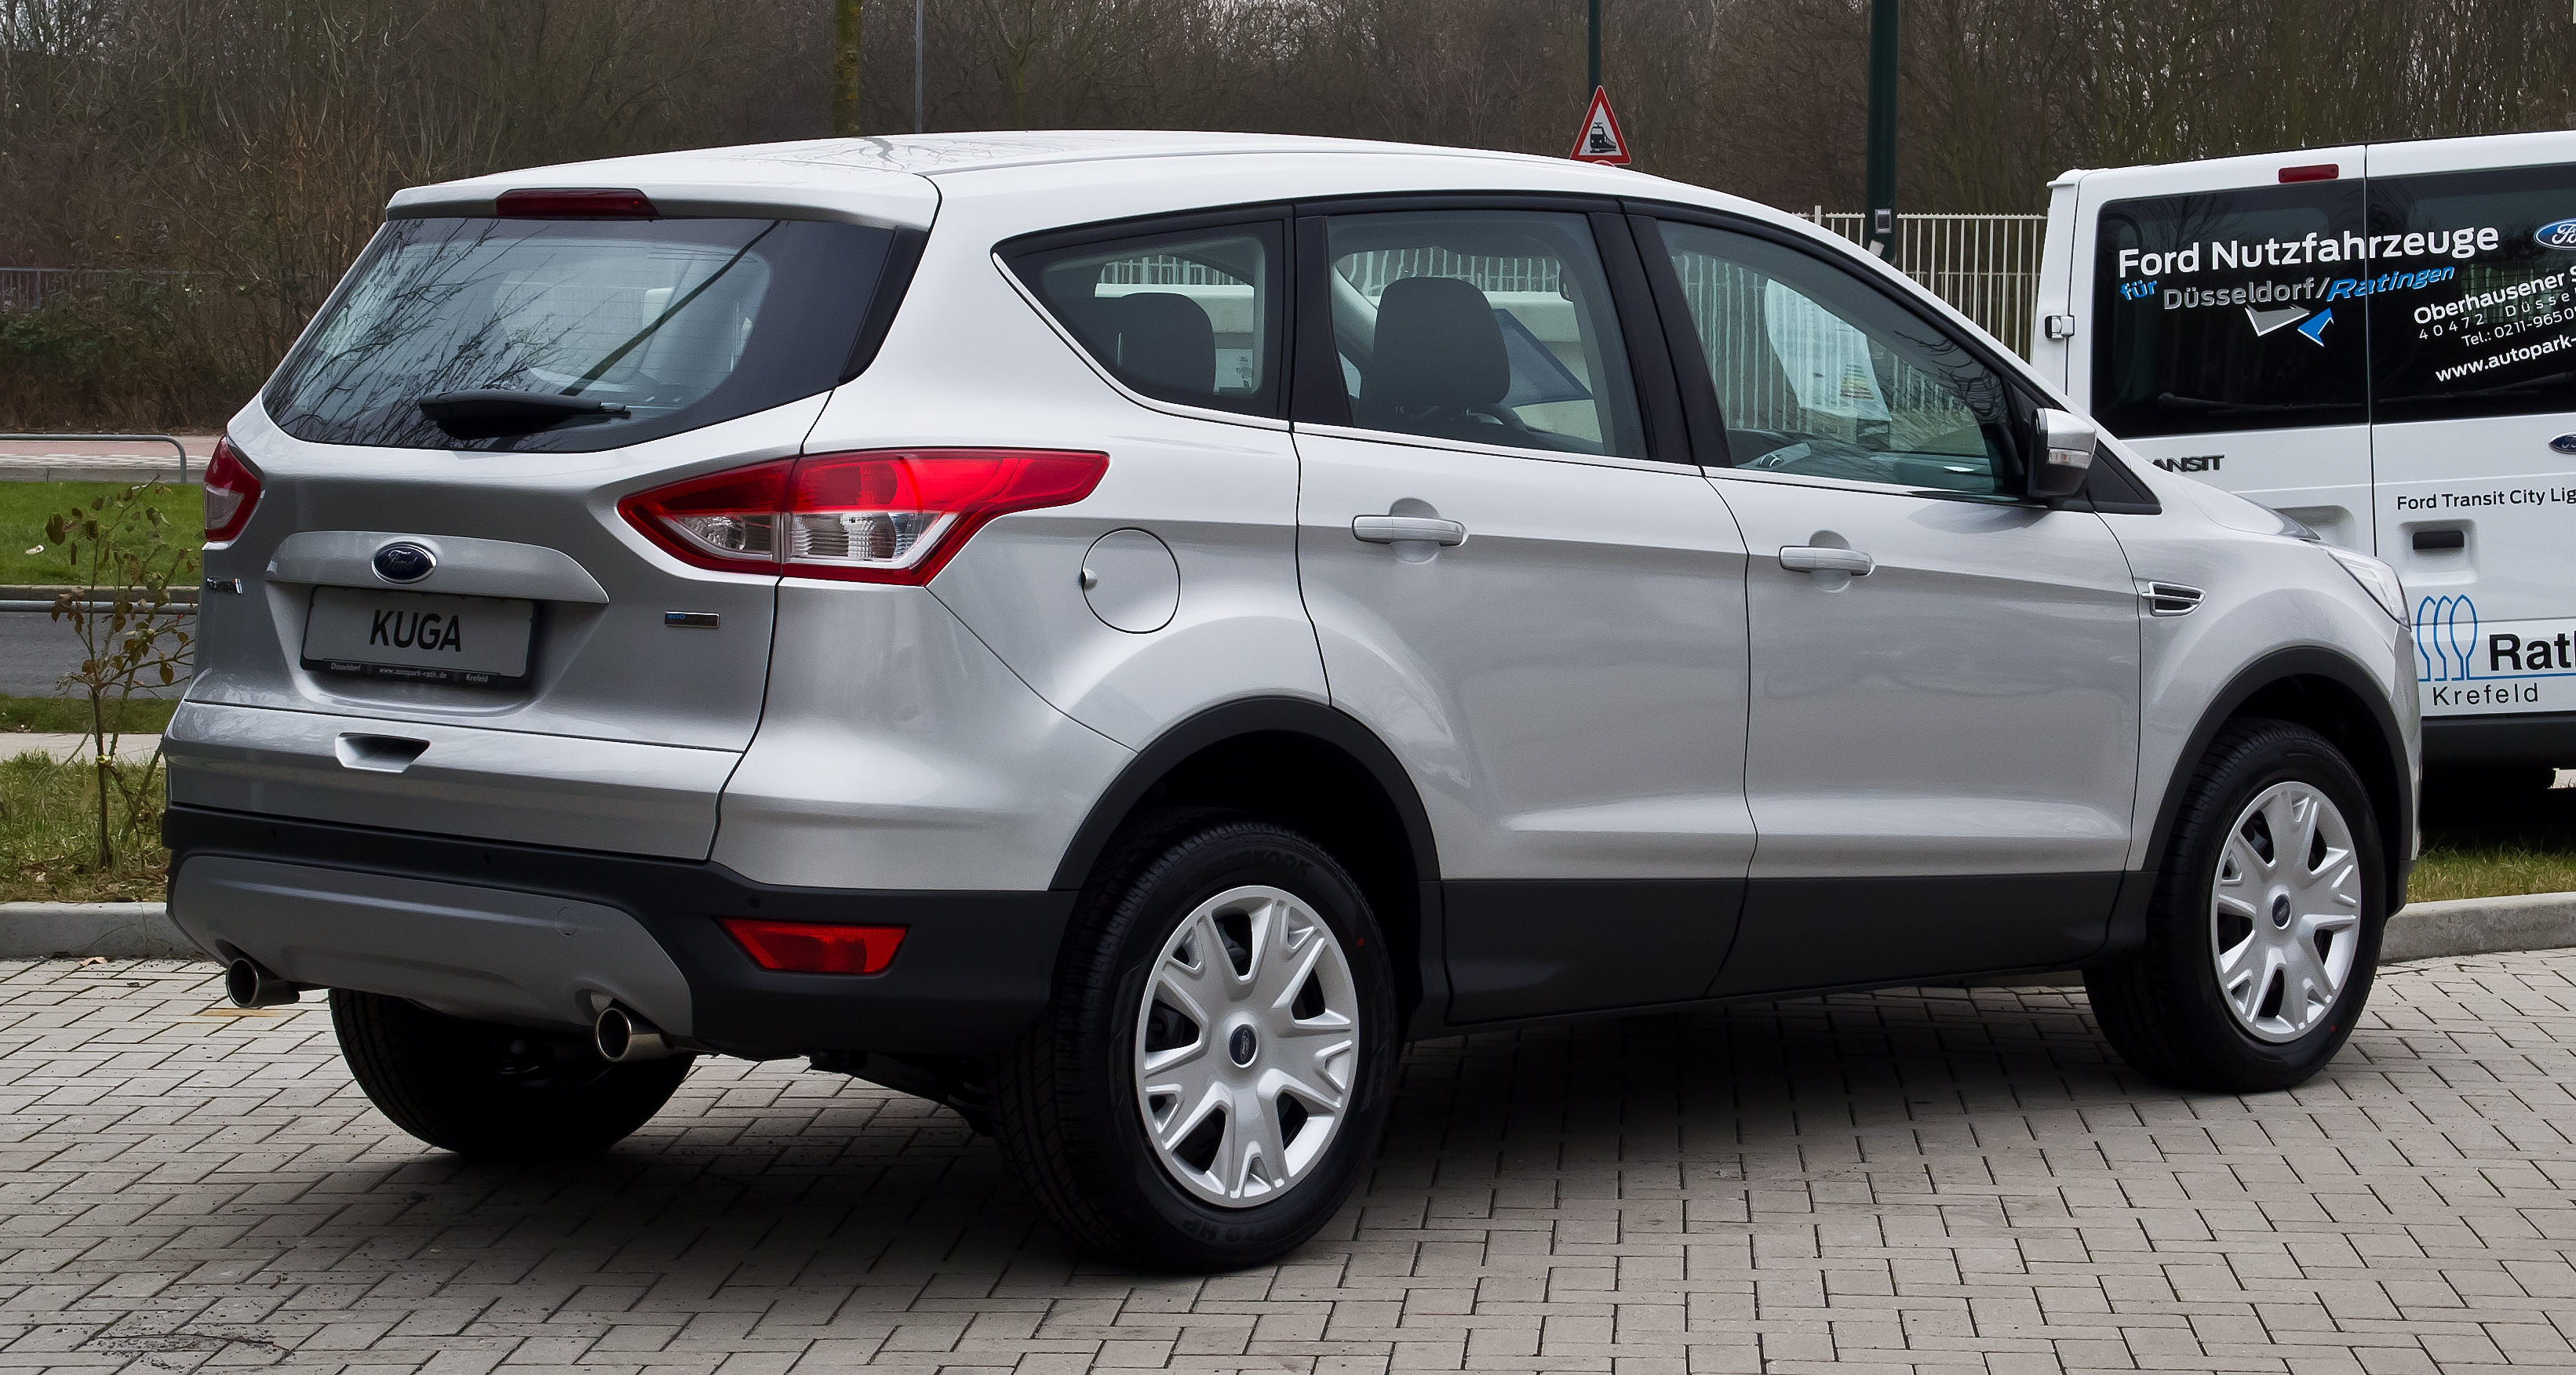 Ford Kuga 1.6 EcoBoost technical details, history, photos